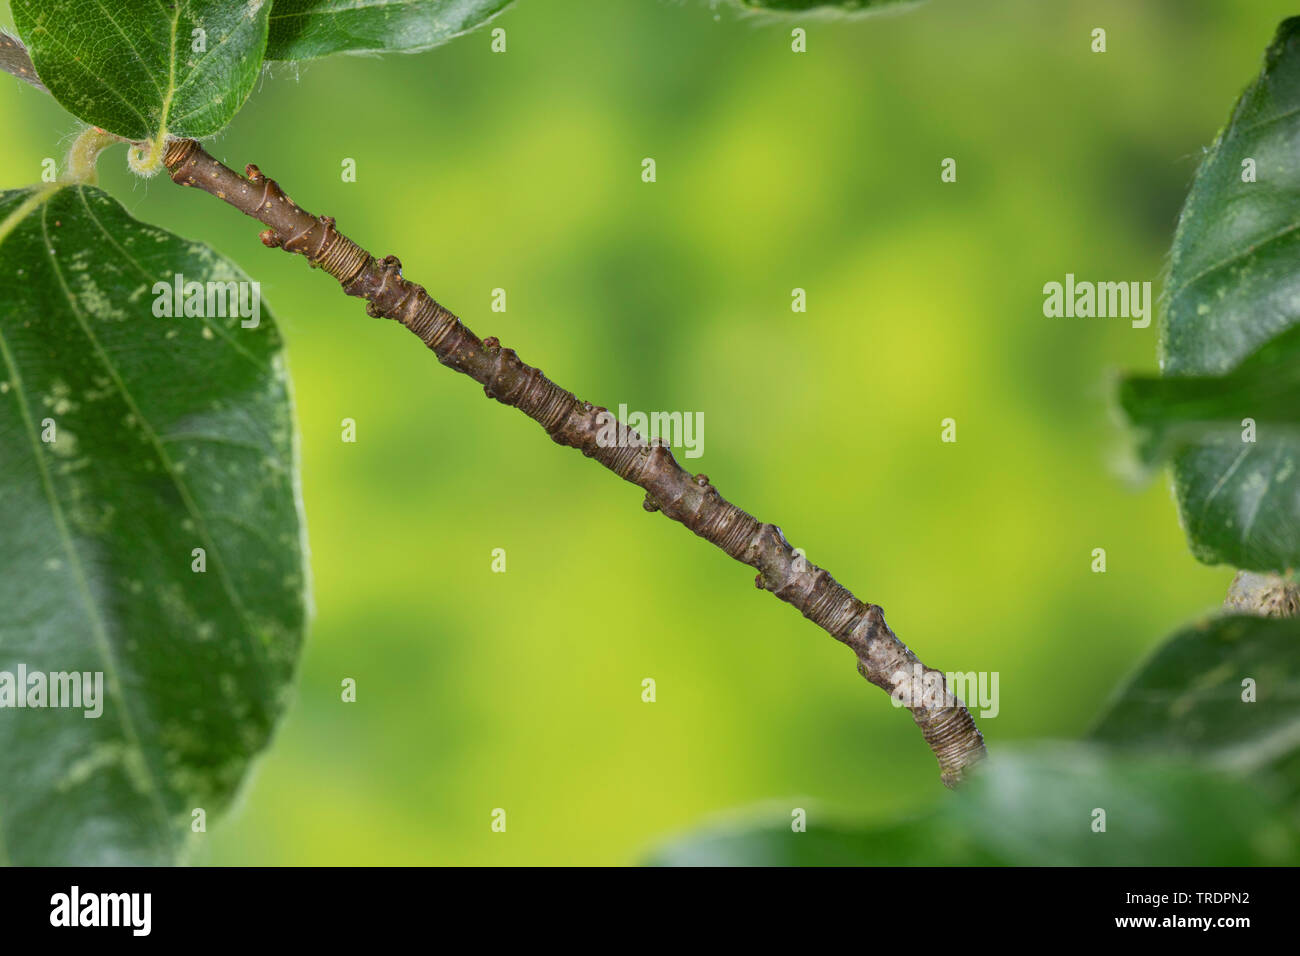 common beech (Fagus sylvatica), determination of the age of a branch with rings, Germany Stock Photo